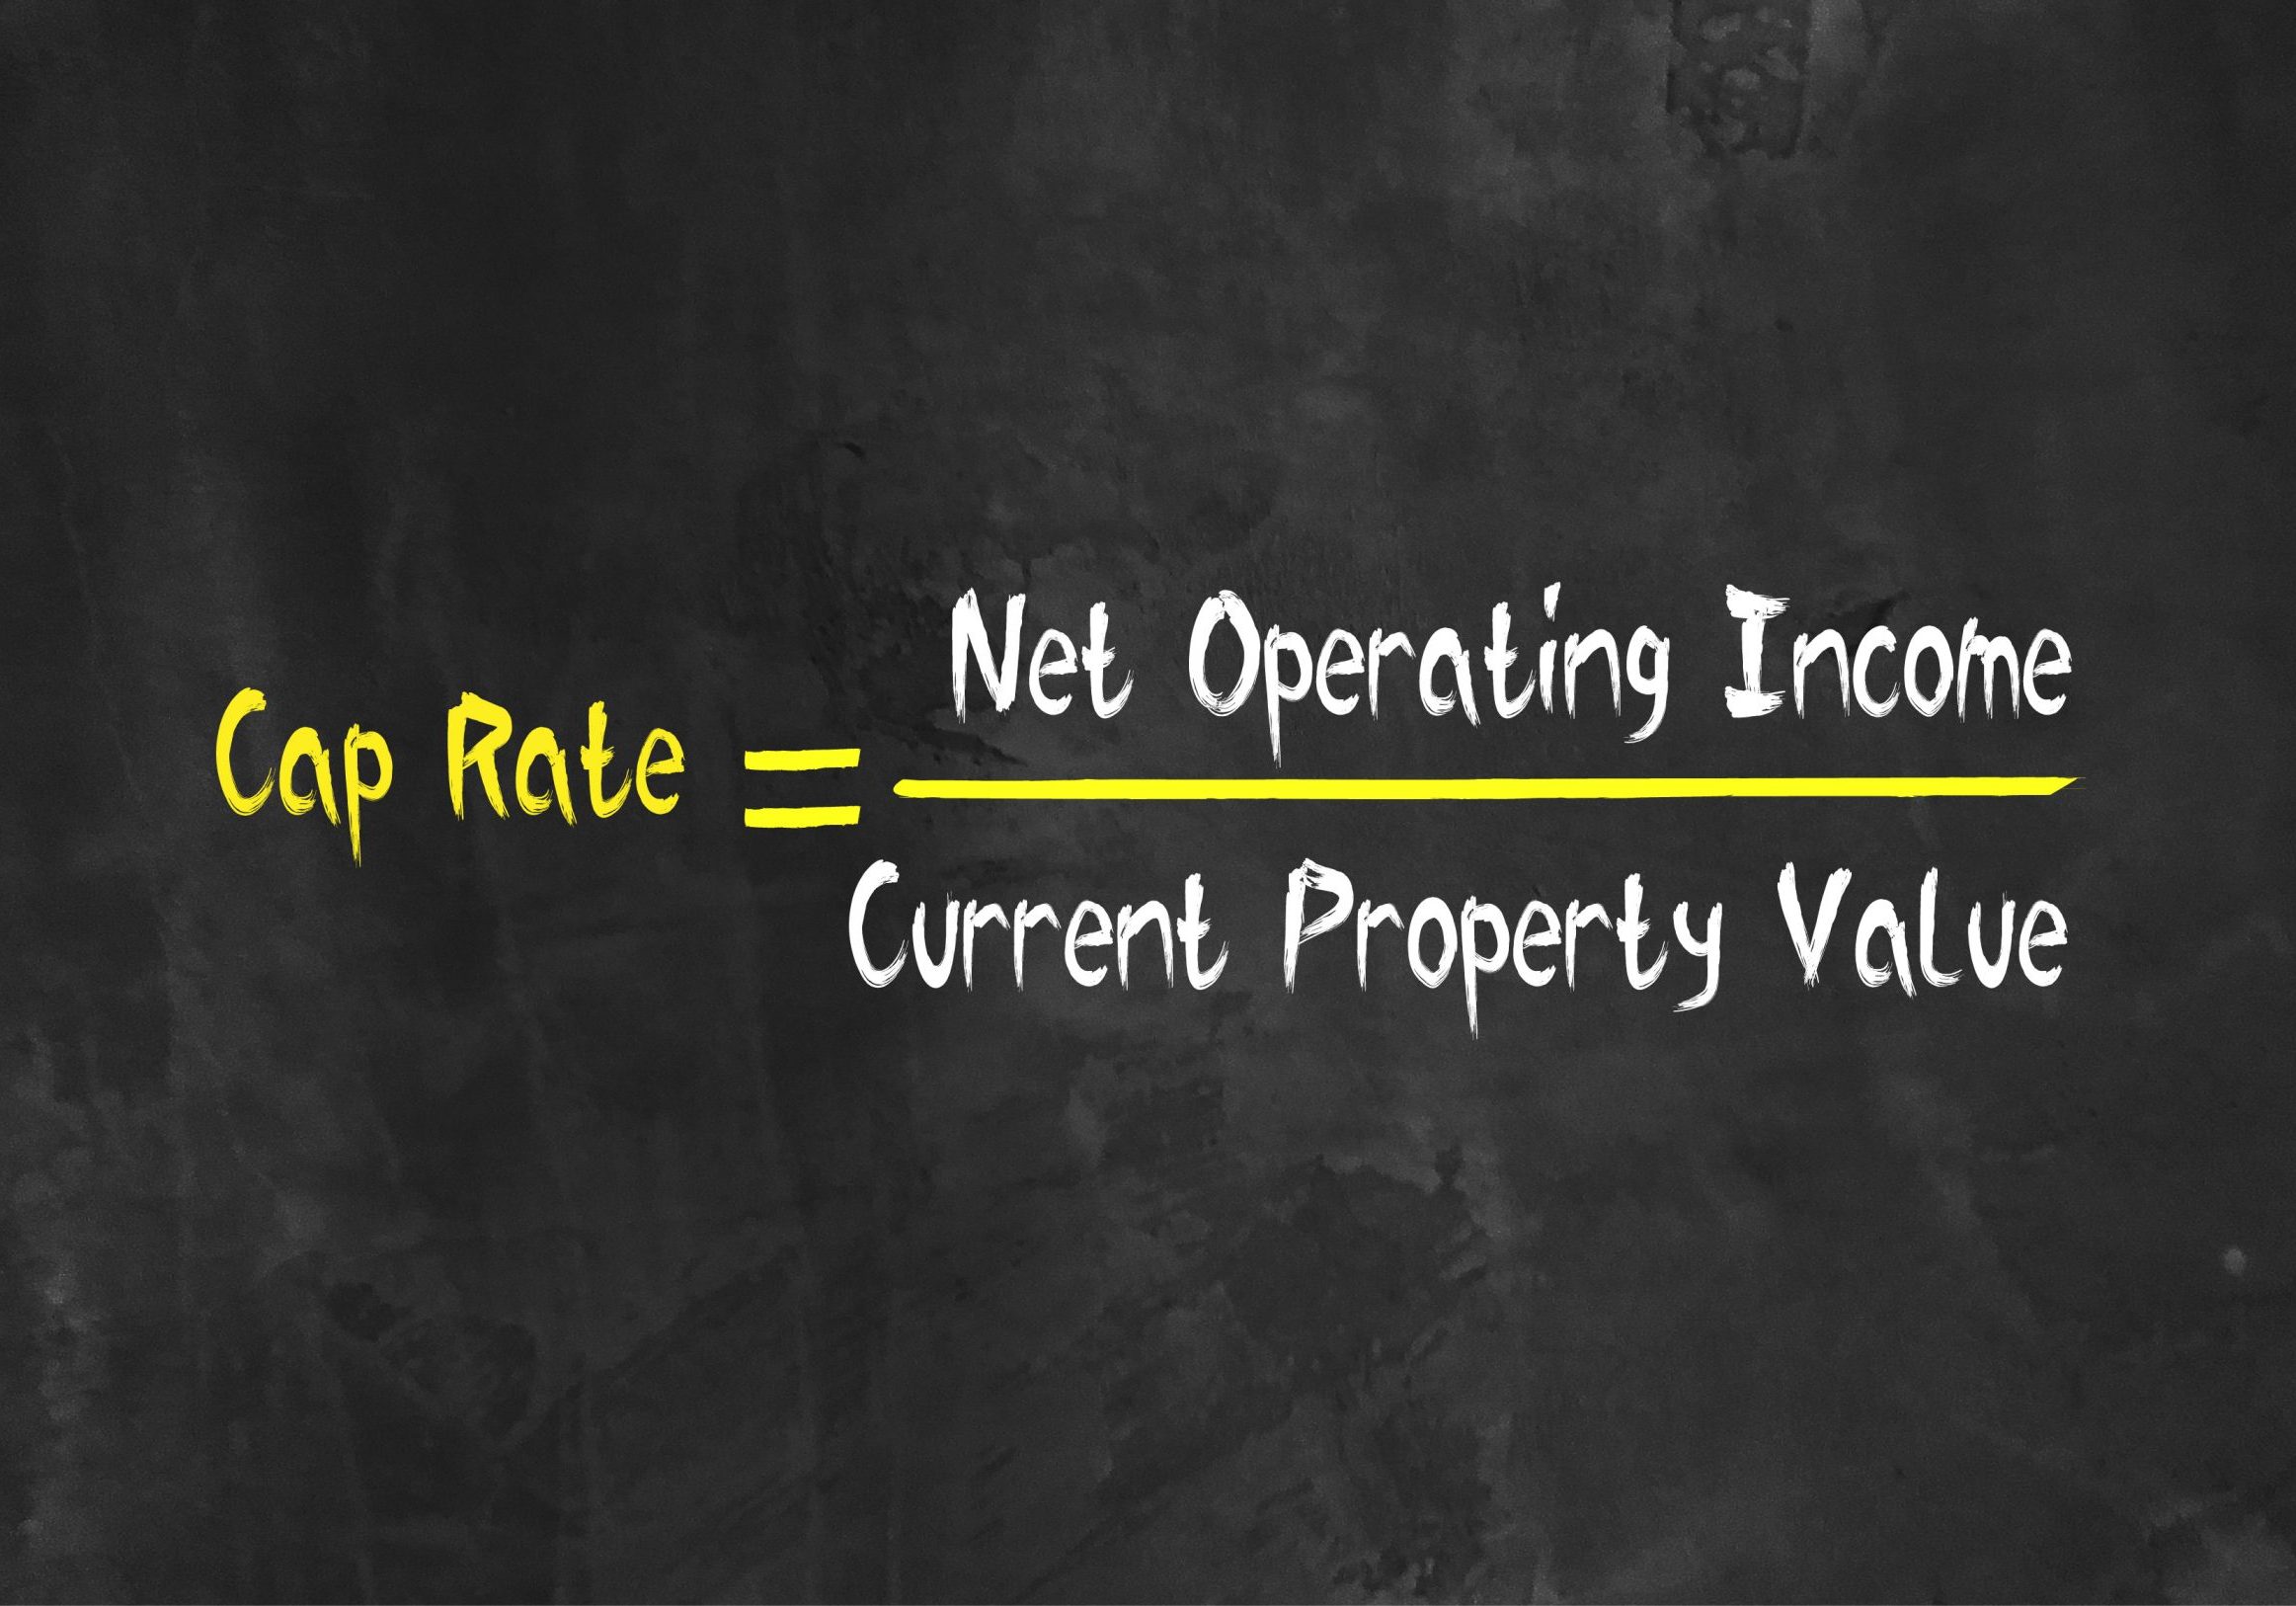 Cap rate equals net operating income divided by property value.